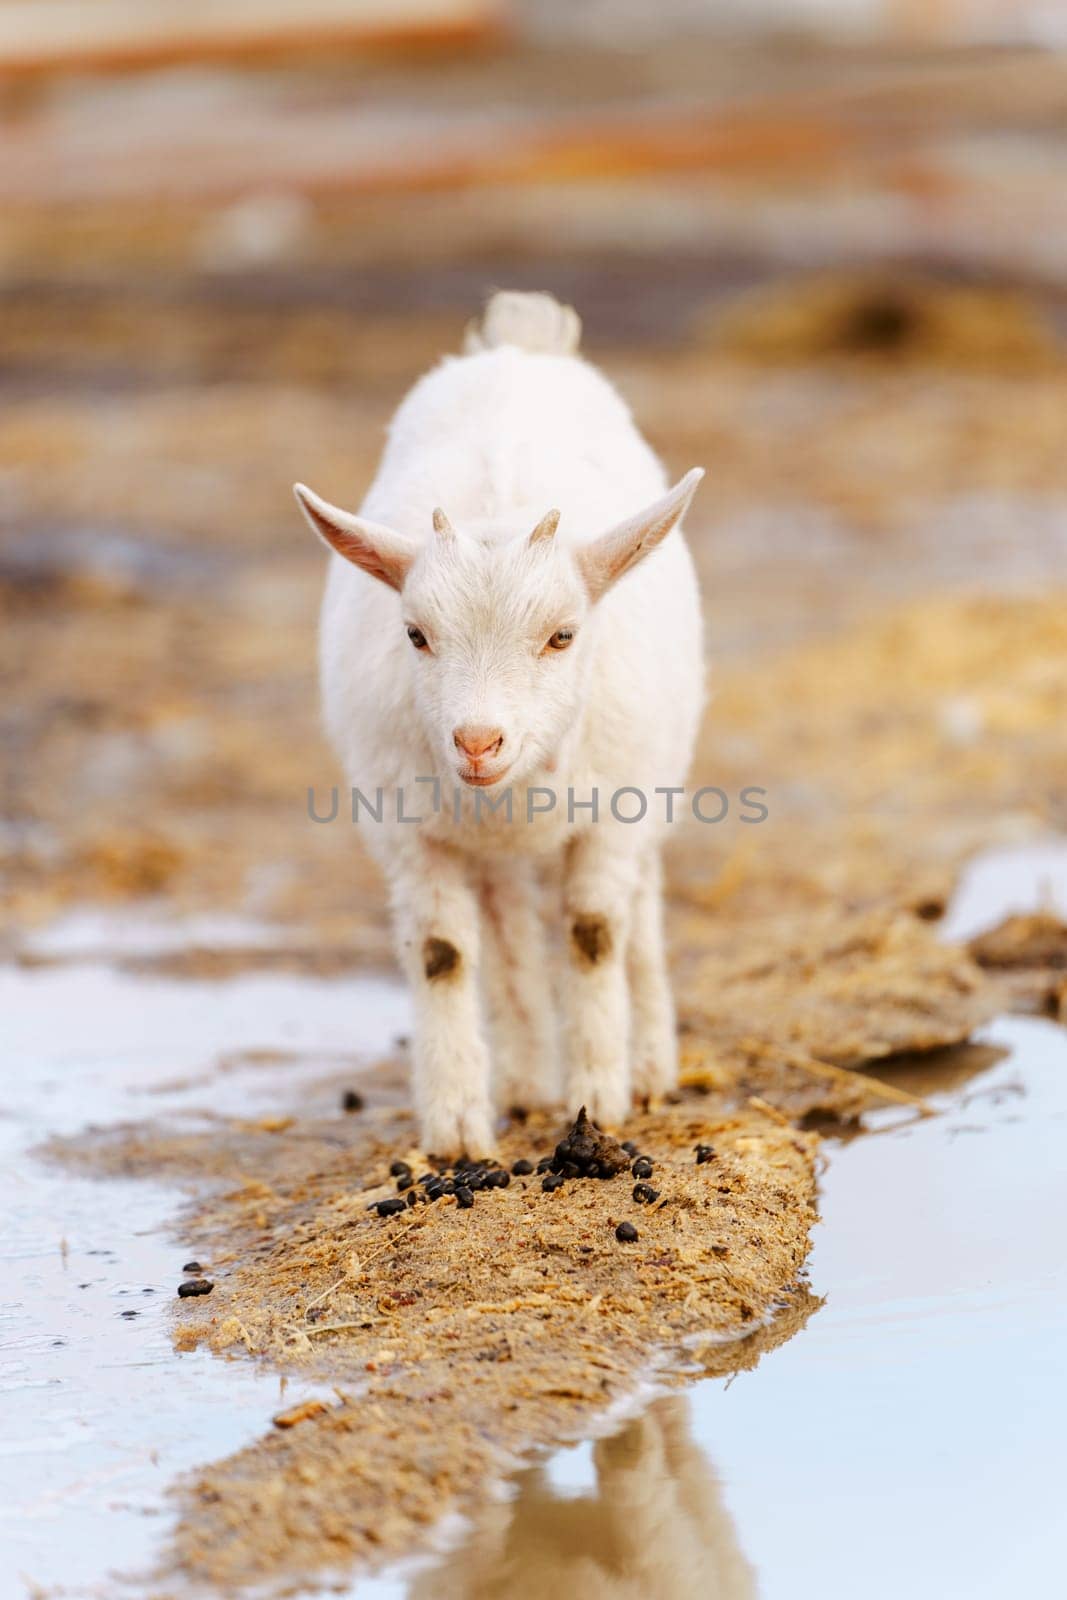 Small white goat curiously stands, surveying its surroundings with interest. Vertical photo